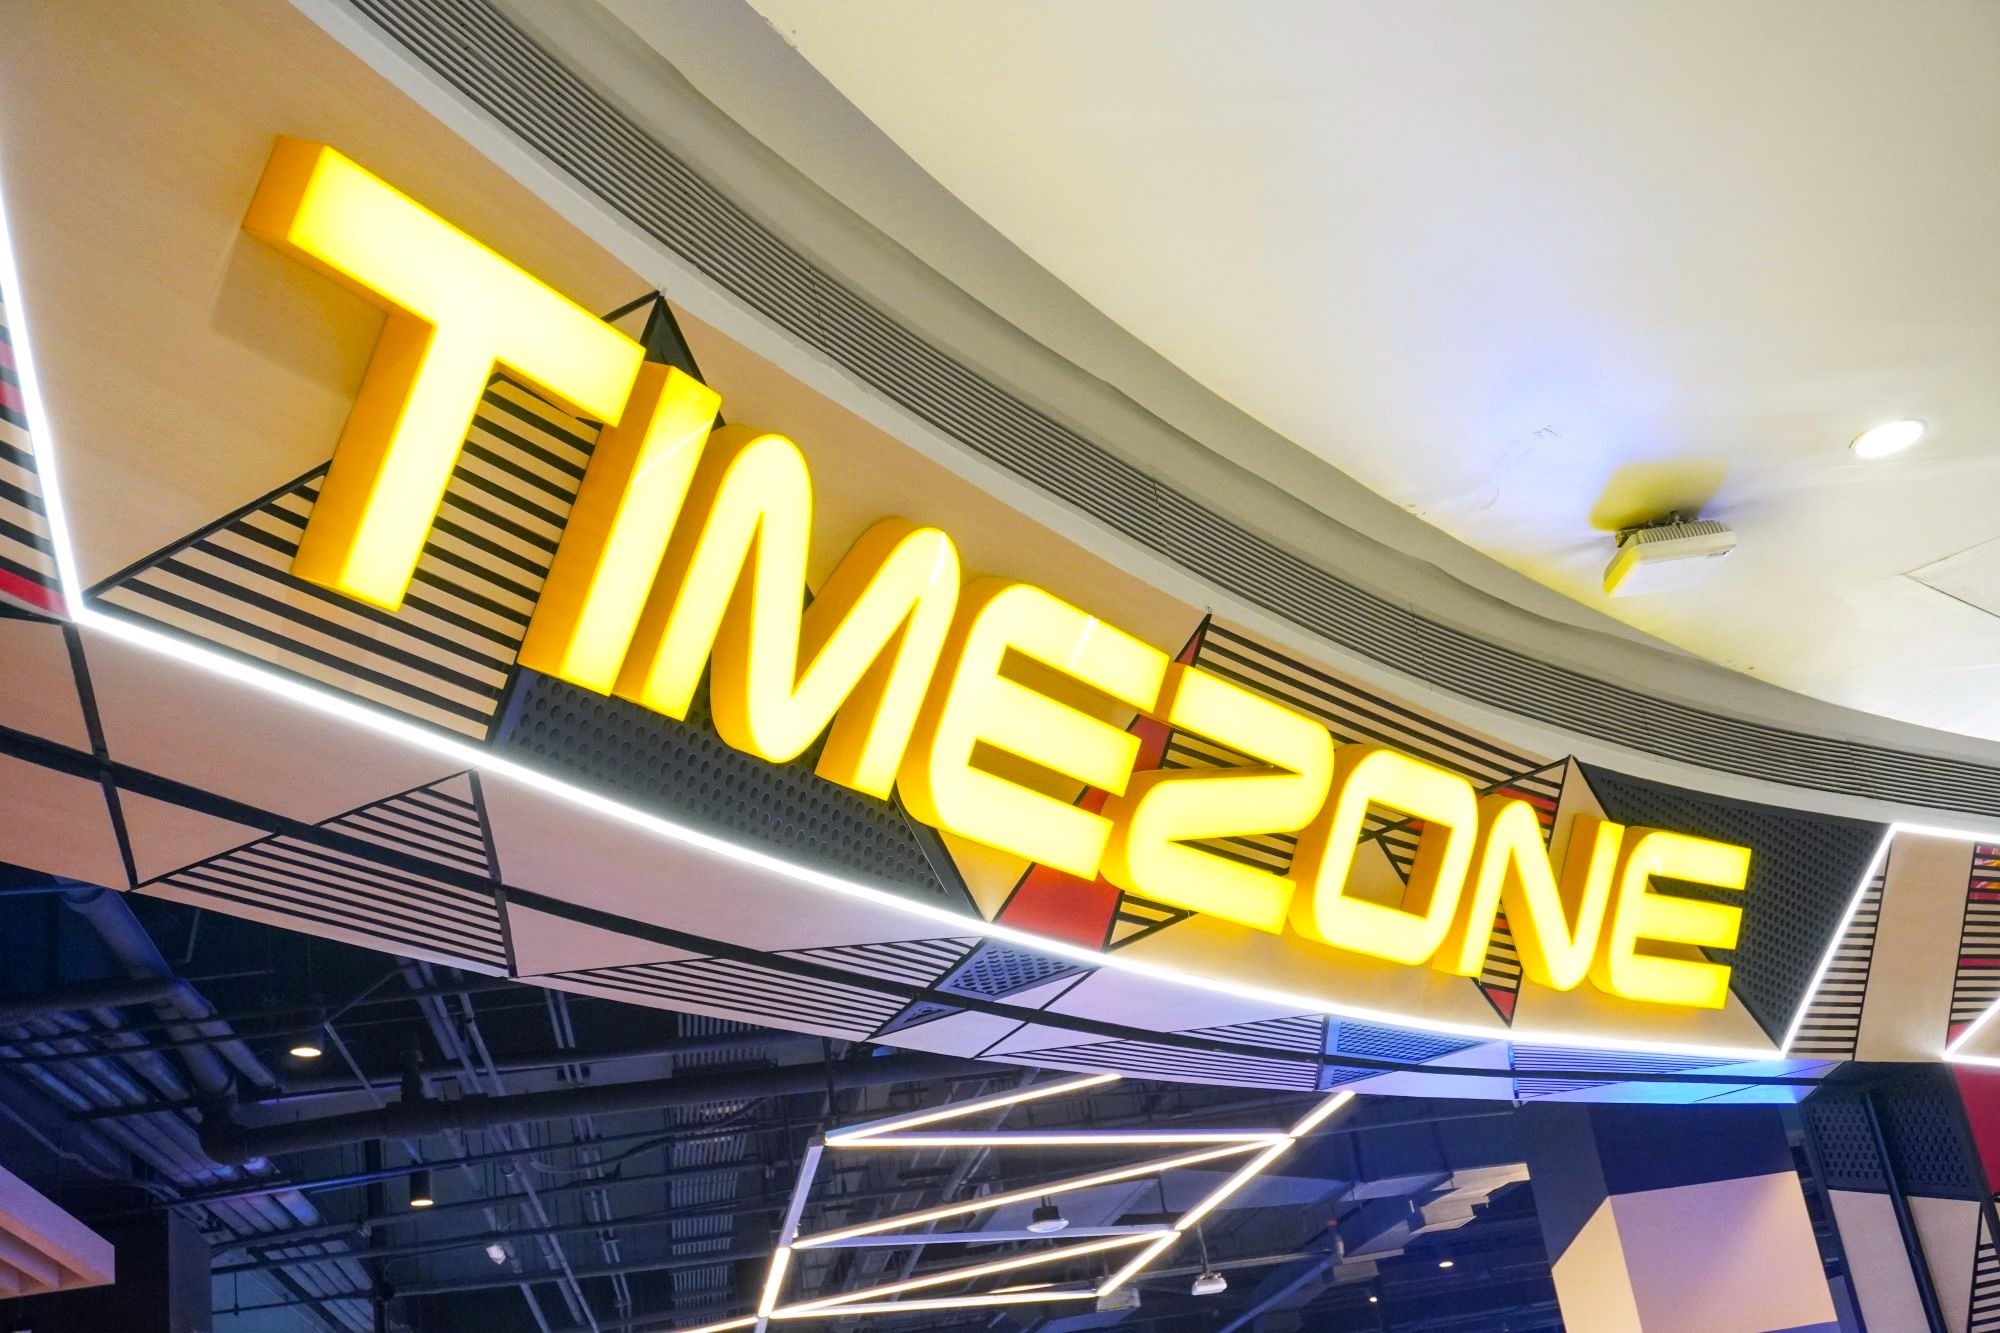 Timezone brings fun arcade experience at the New Gateway Mall 2